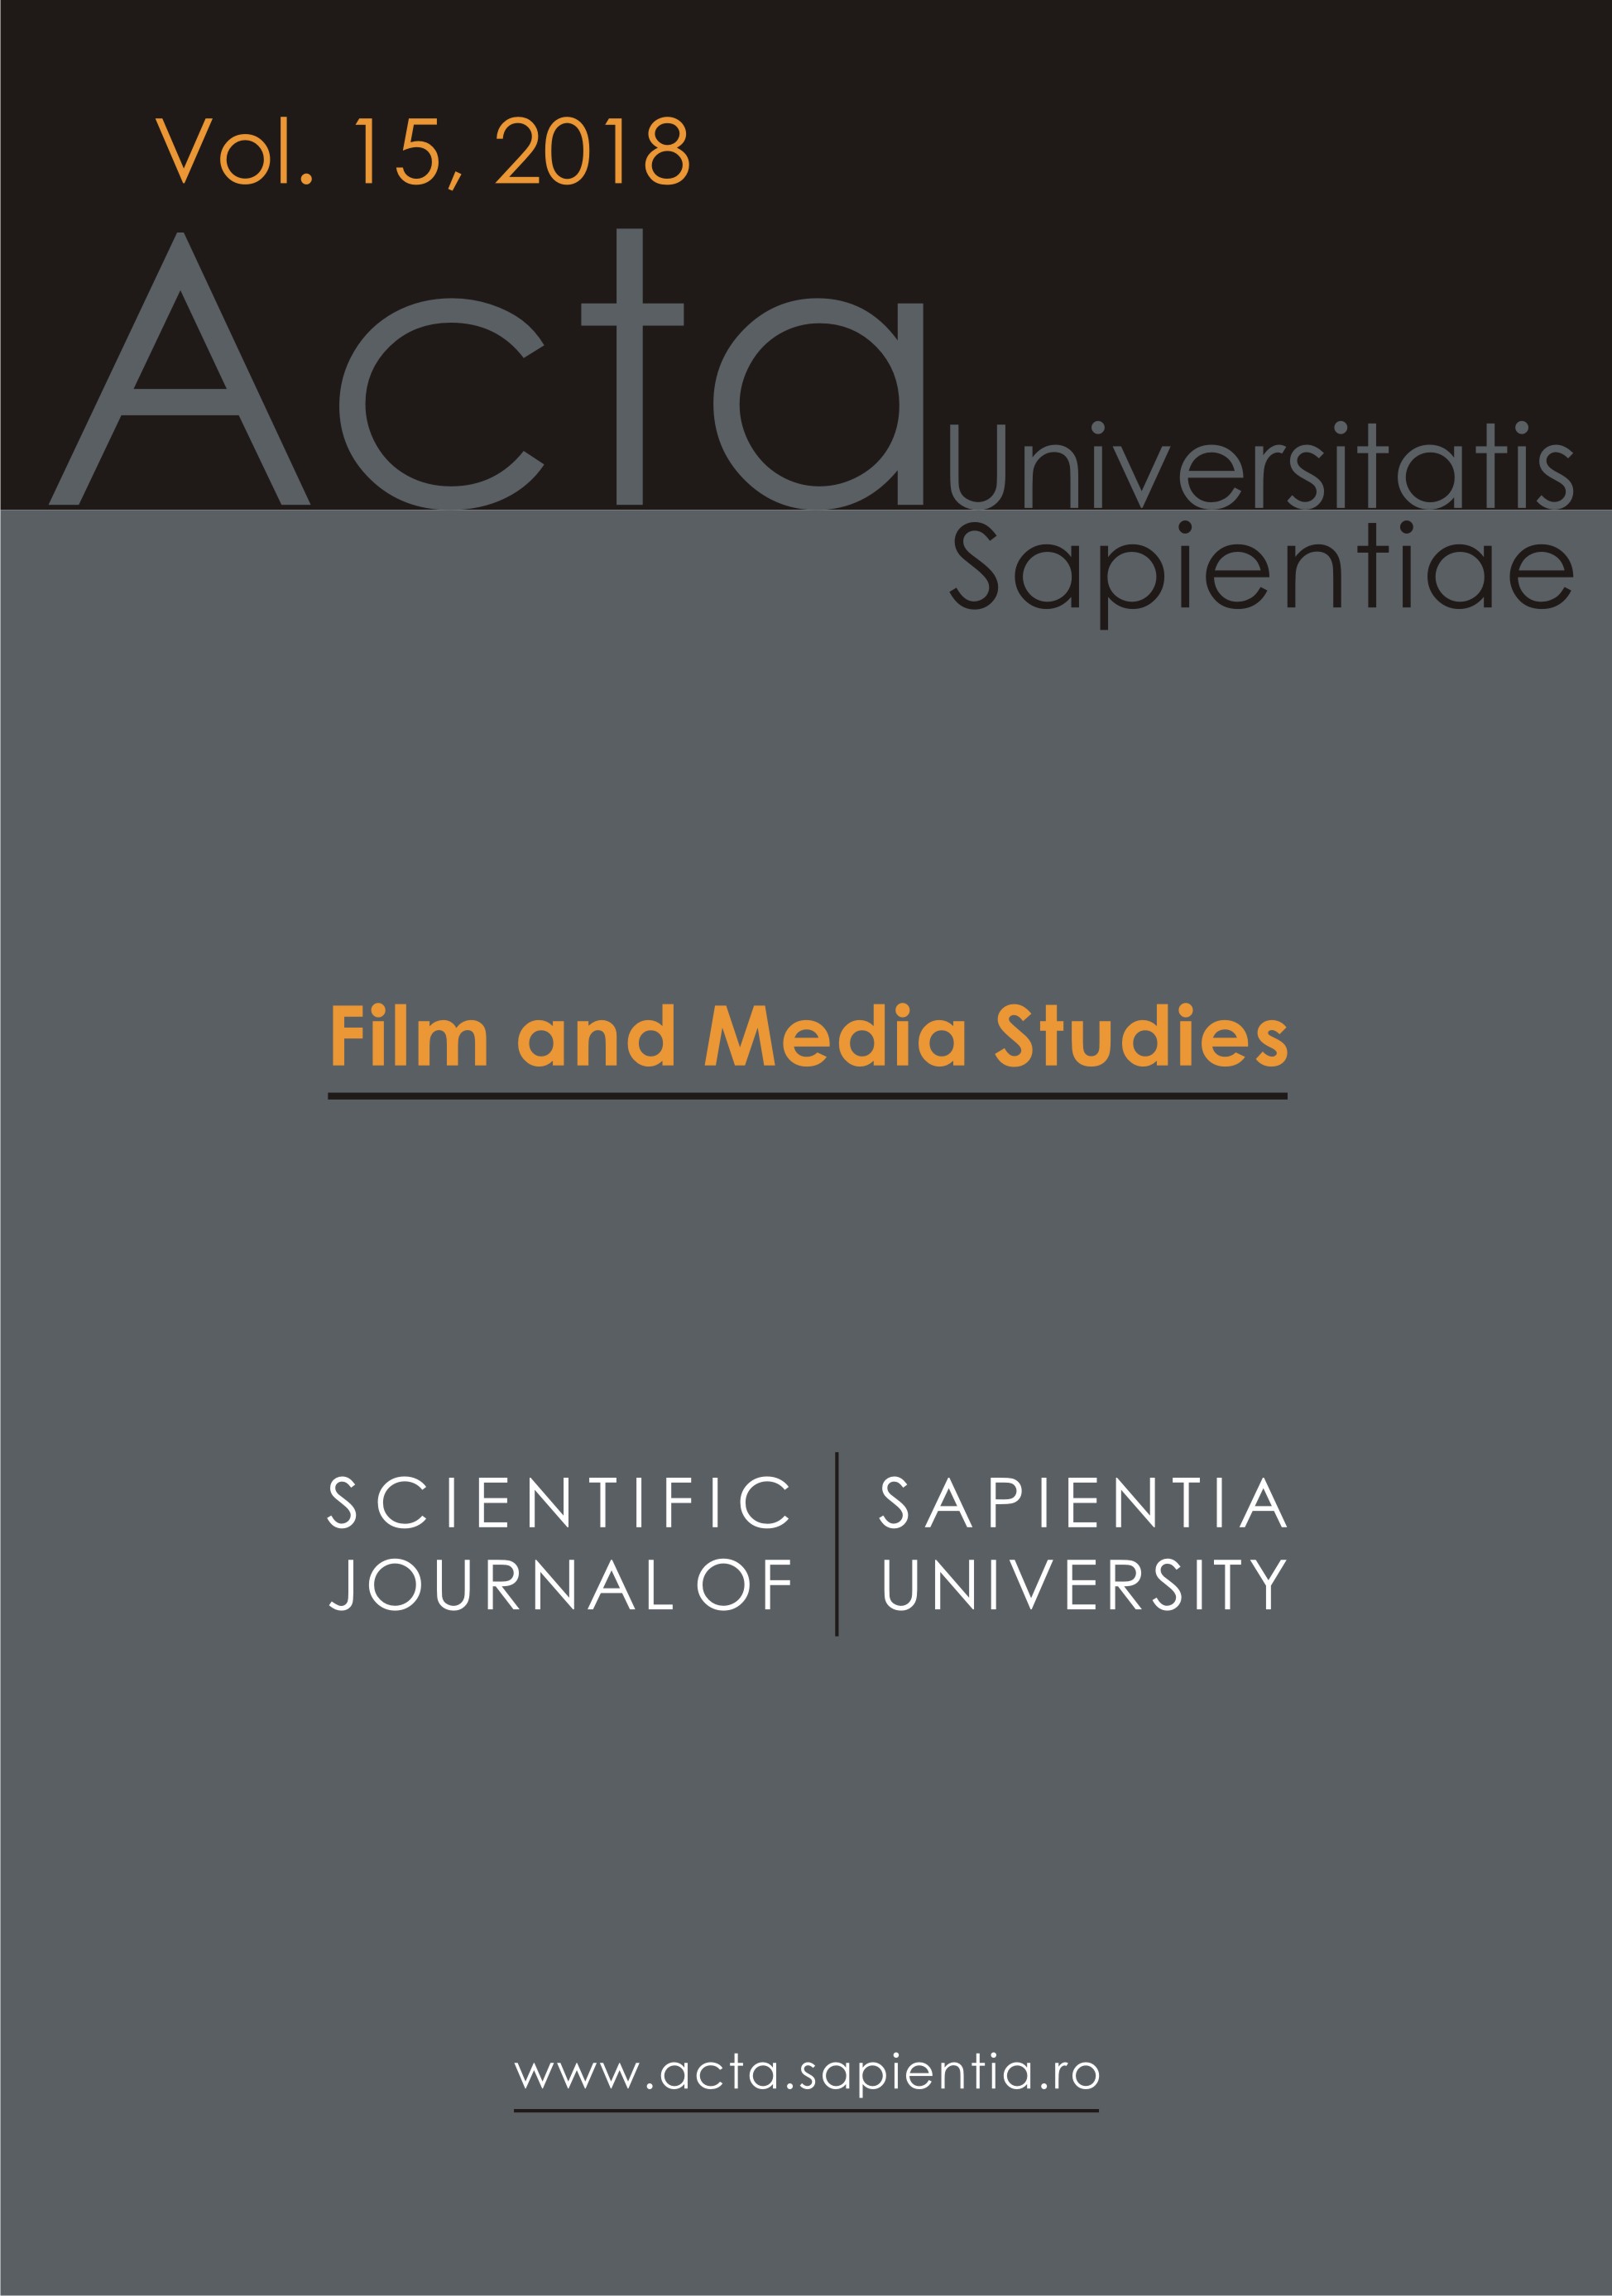 “Film Studies Always Need the Wider Approach of Intermediality.” Cover Image